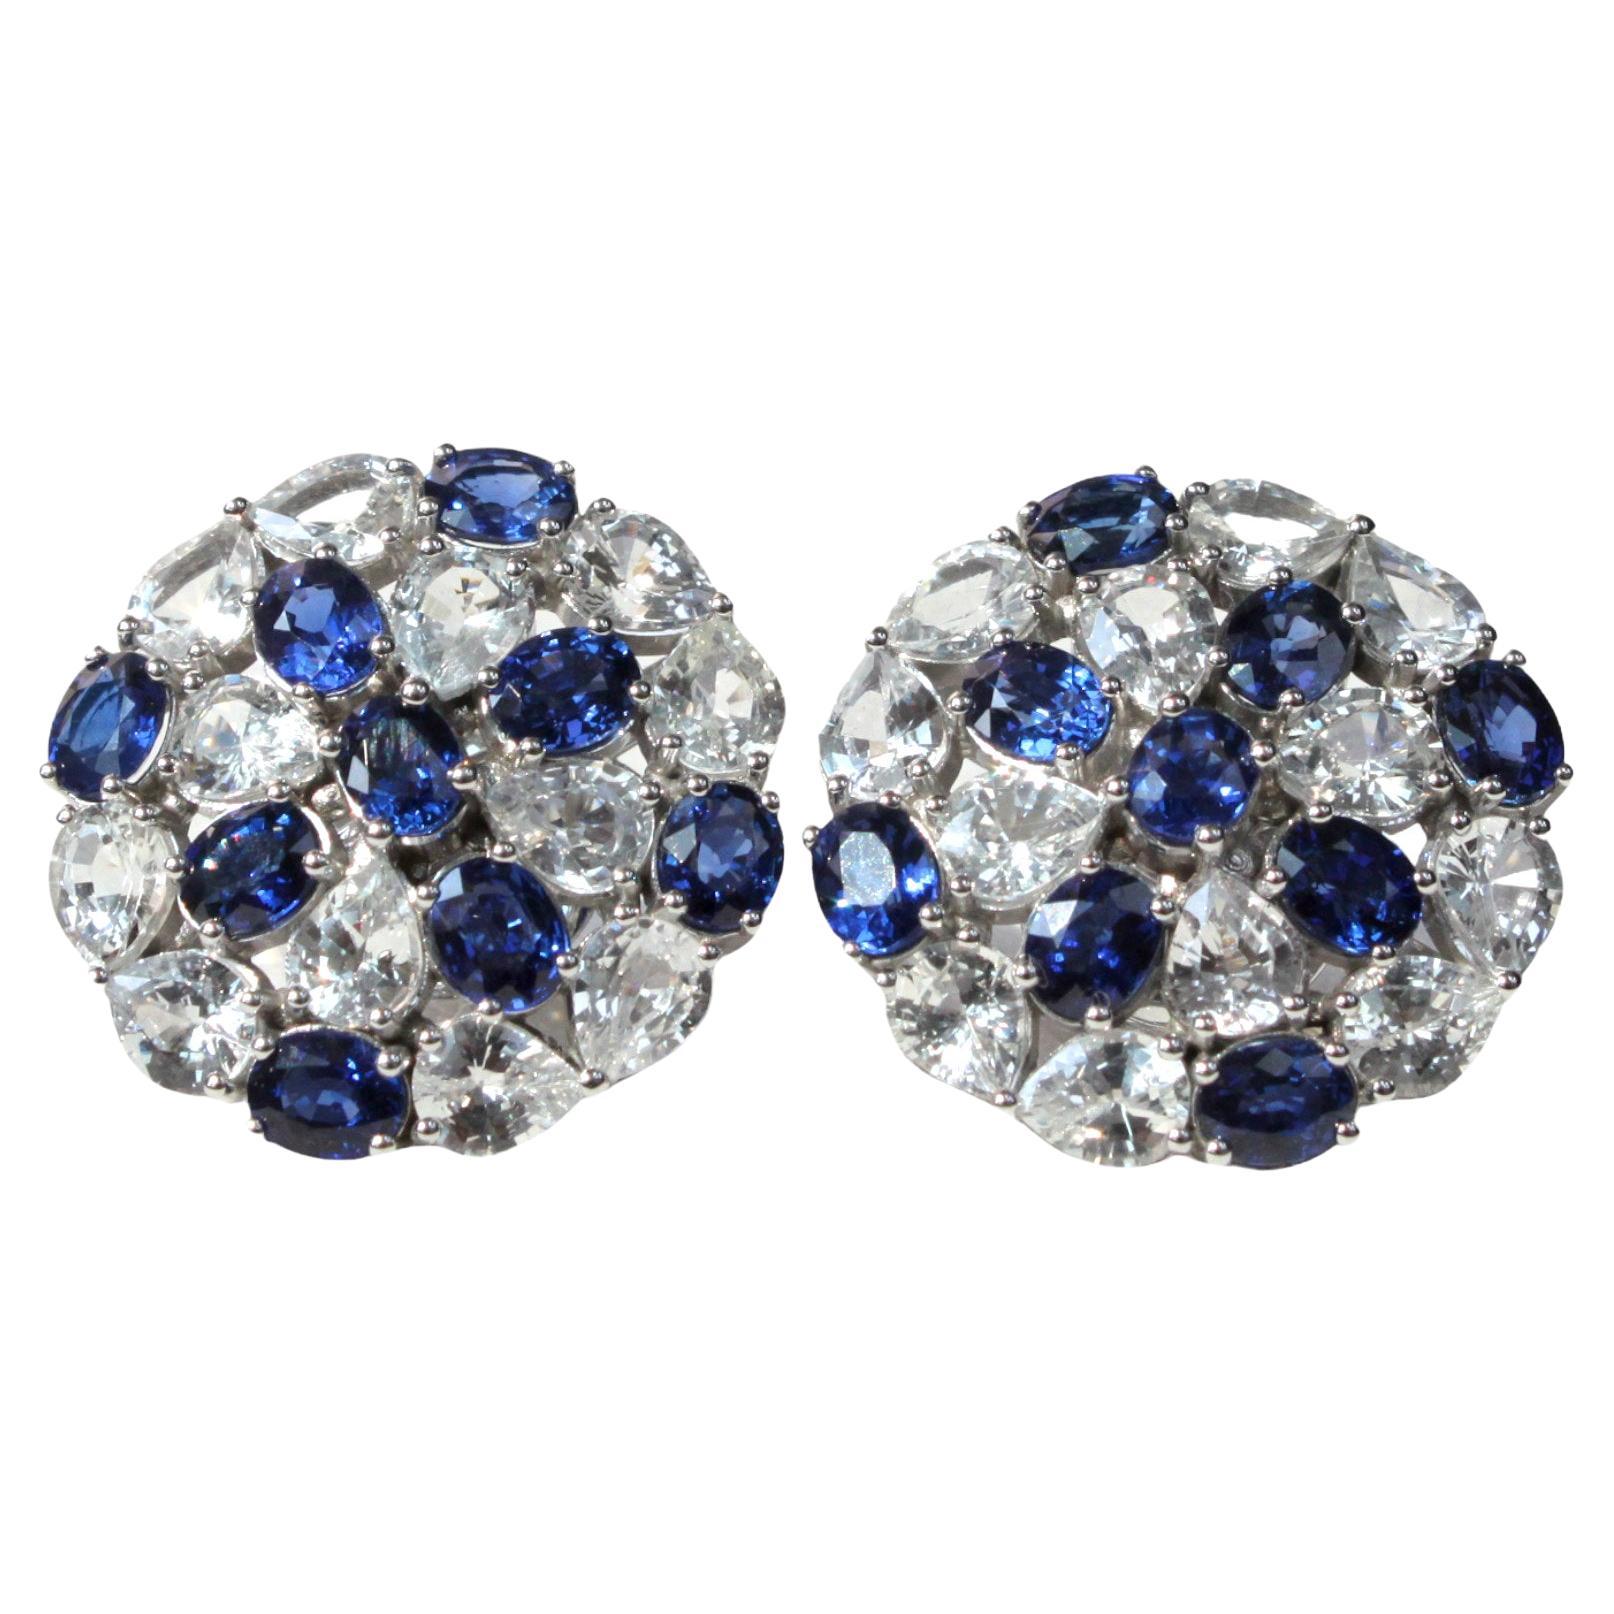 Blue and White Sapphire Earrings in Gleaming 14K White Gold